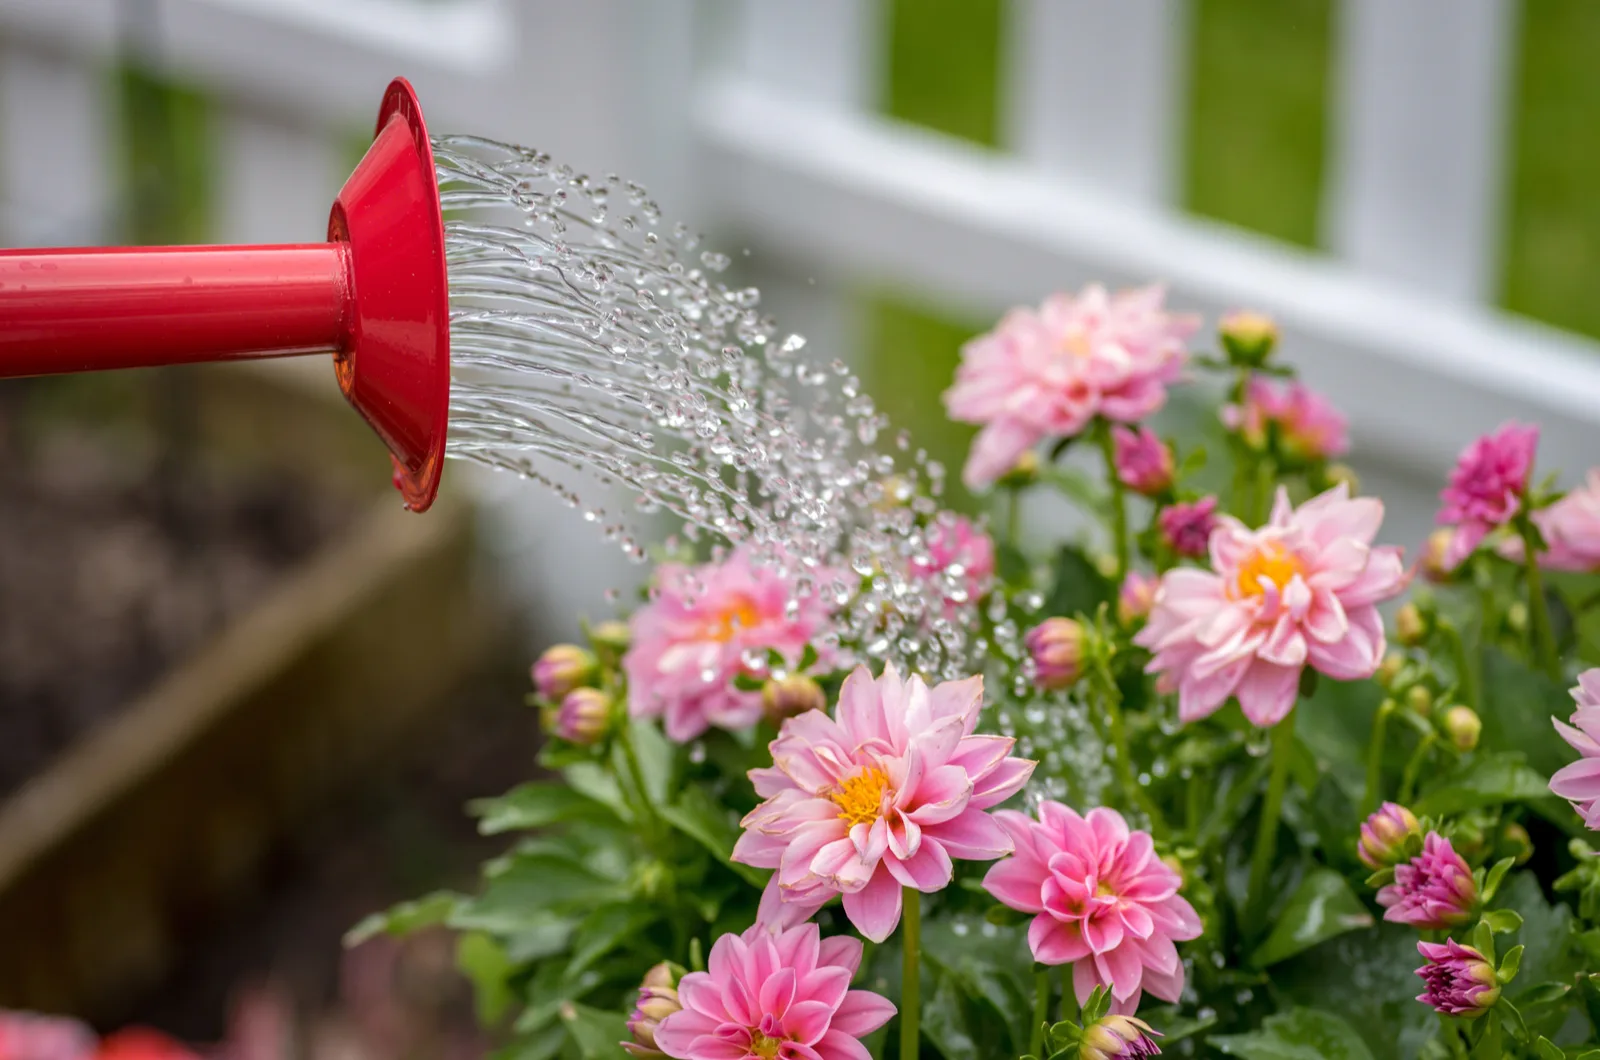 watering can pouring water on pink dahlia flowers